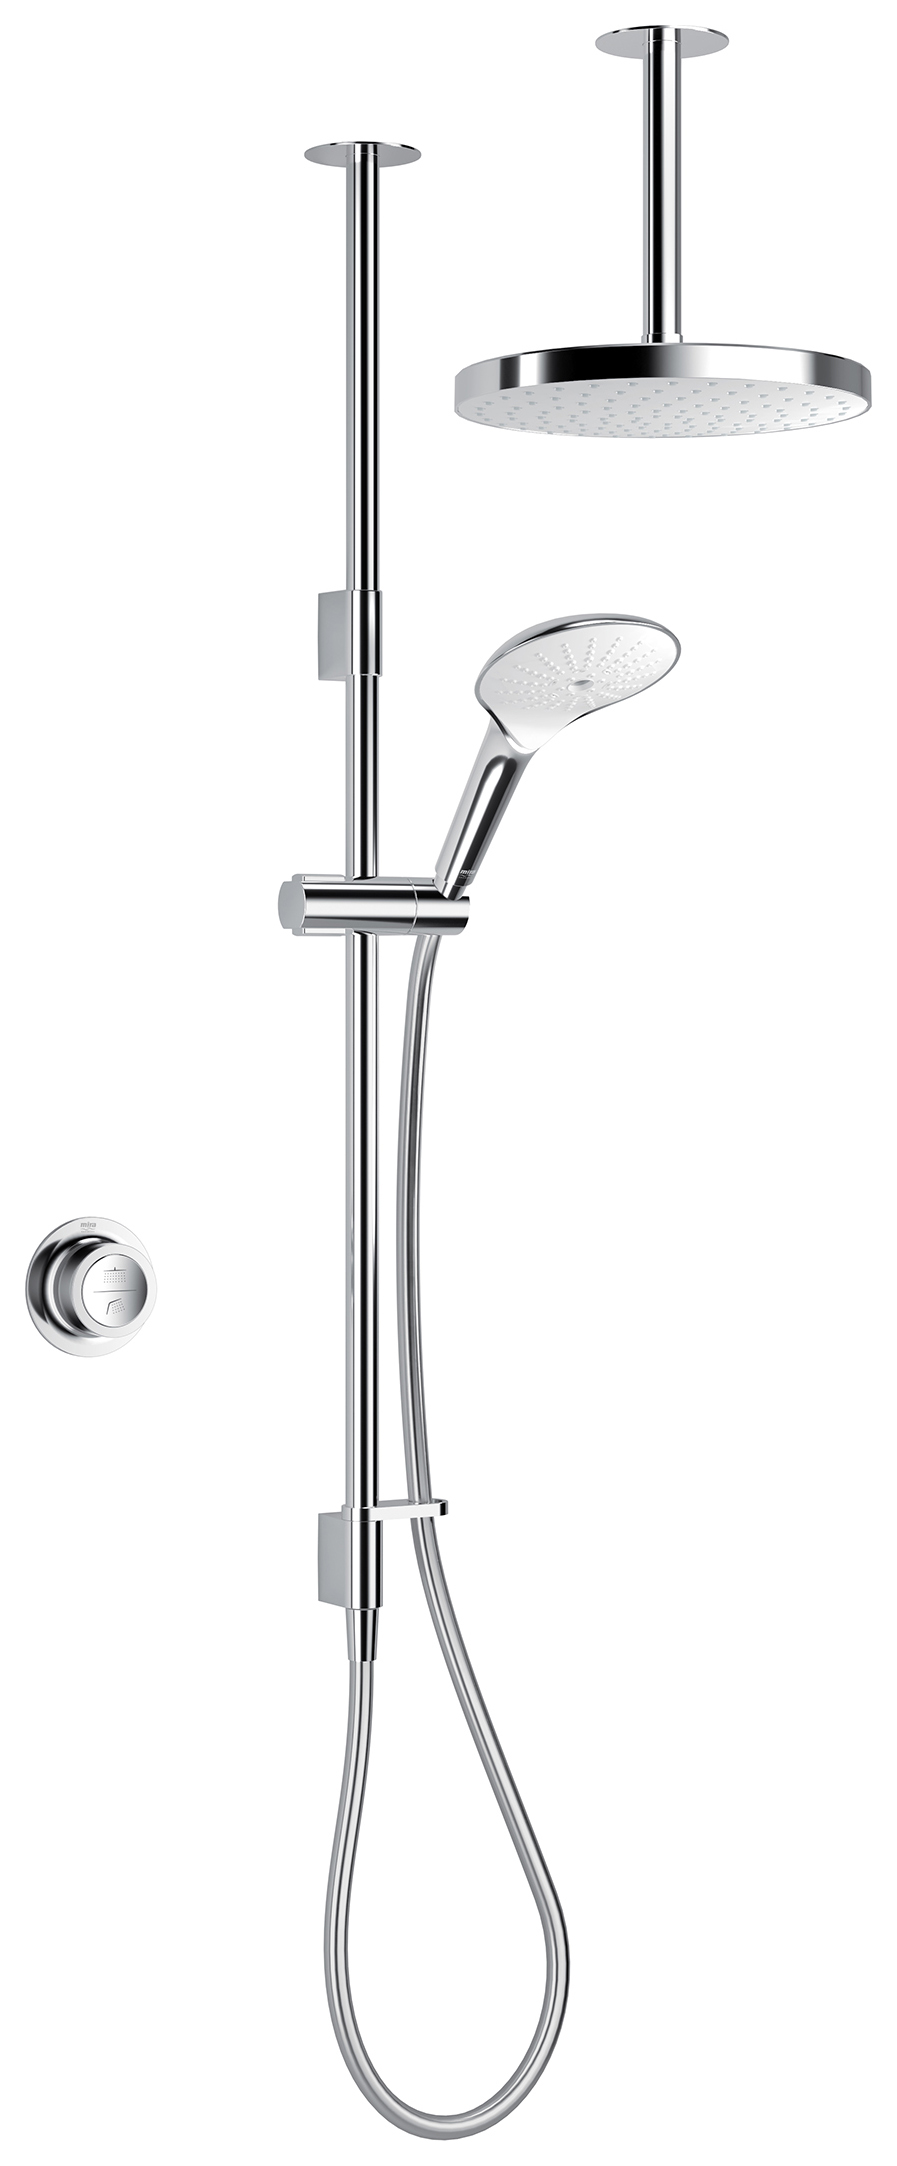 Image of Mira Mode Dual Outlet Gravity Pumped Ceiling Fed Digital Mixer Shower - Chrome